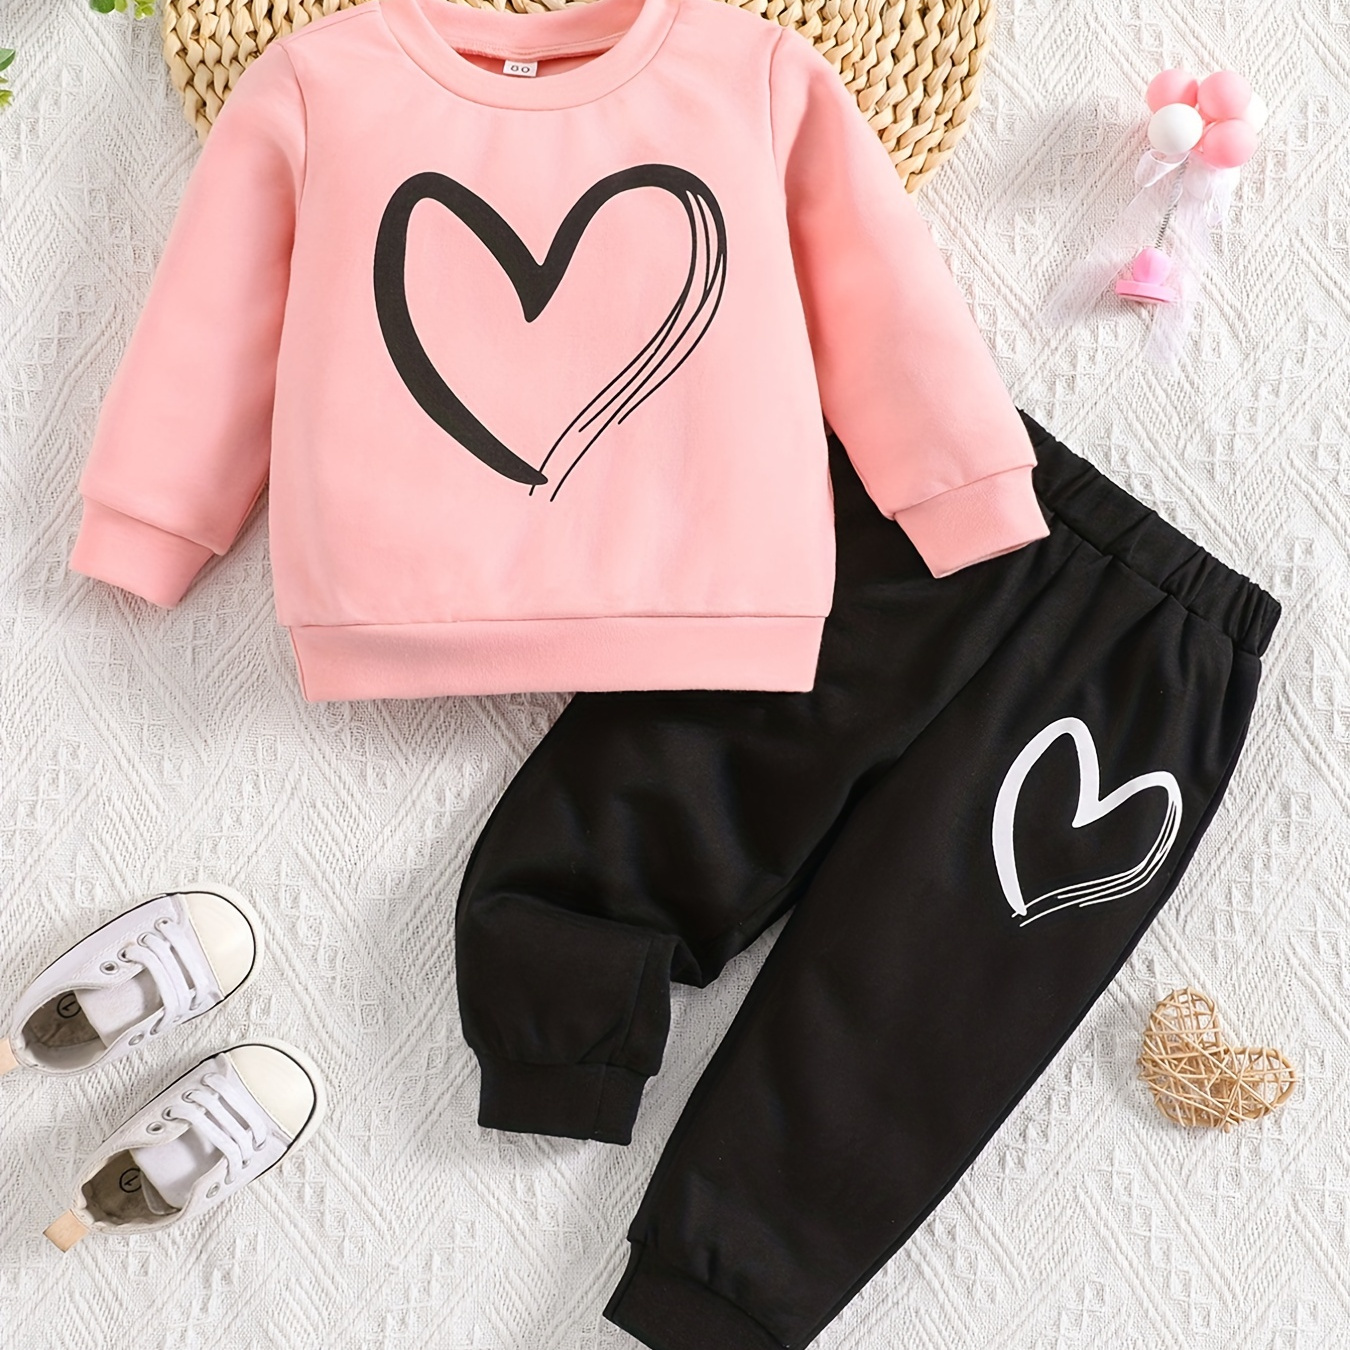 

Adorable Love-themed Outfit For Toddler Girls - Long Sleeve Sweatshirt & Pants Set For Spring & Autumn